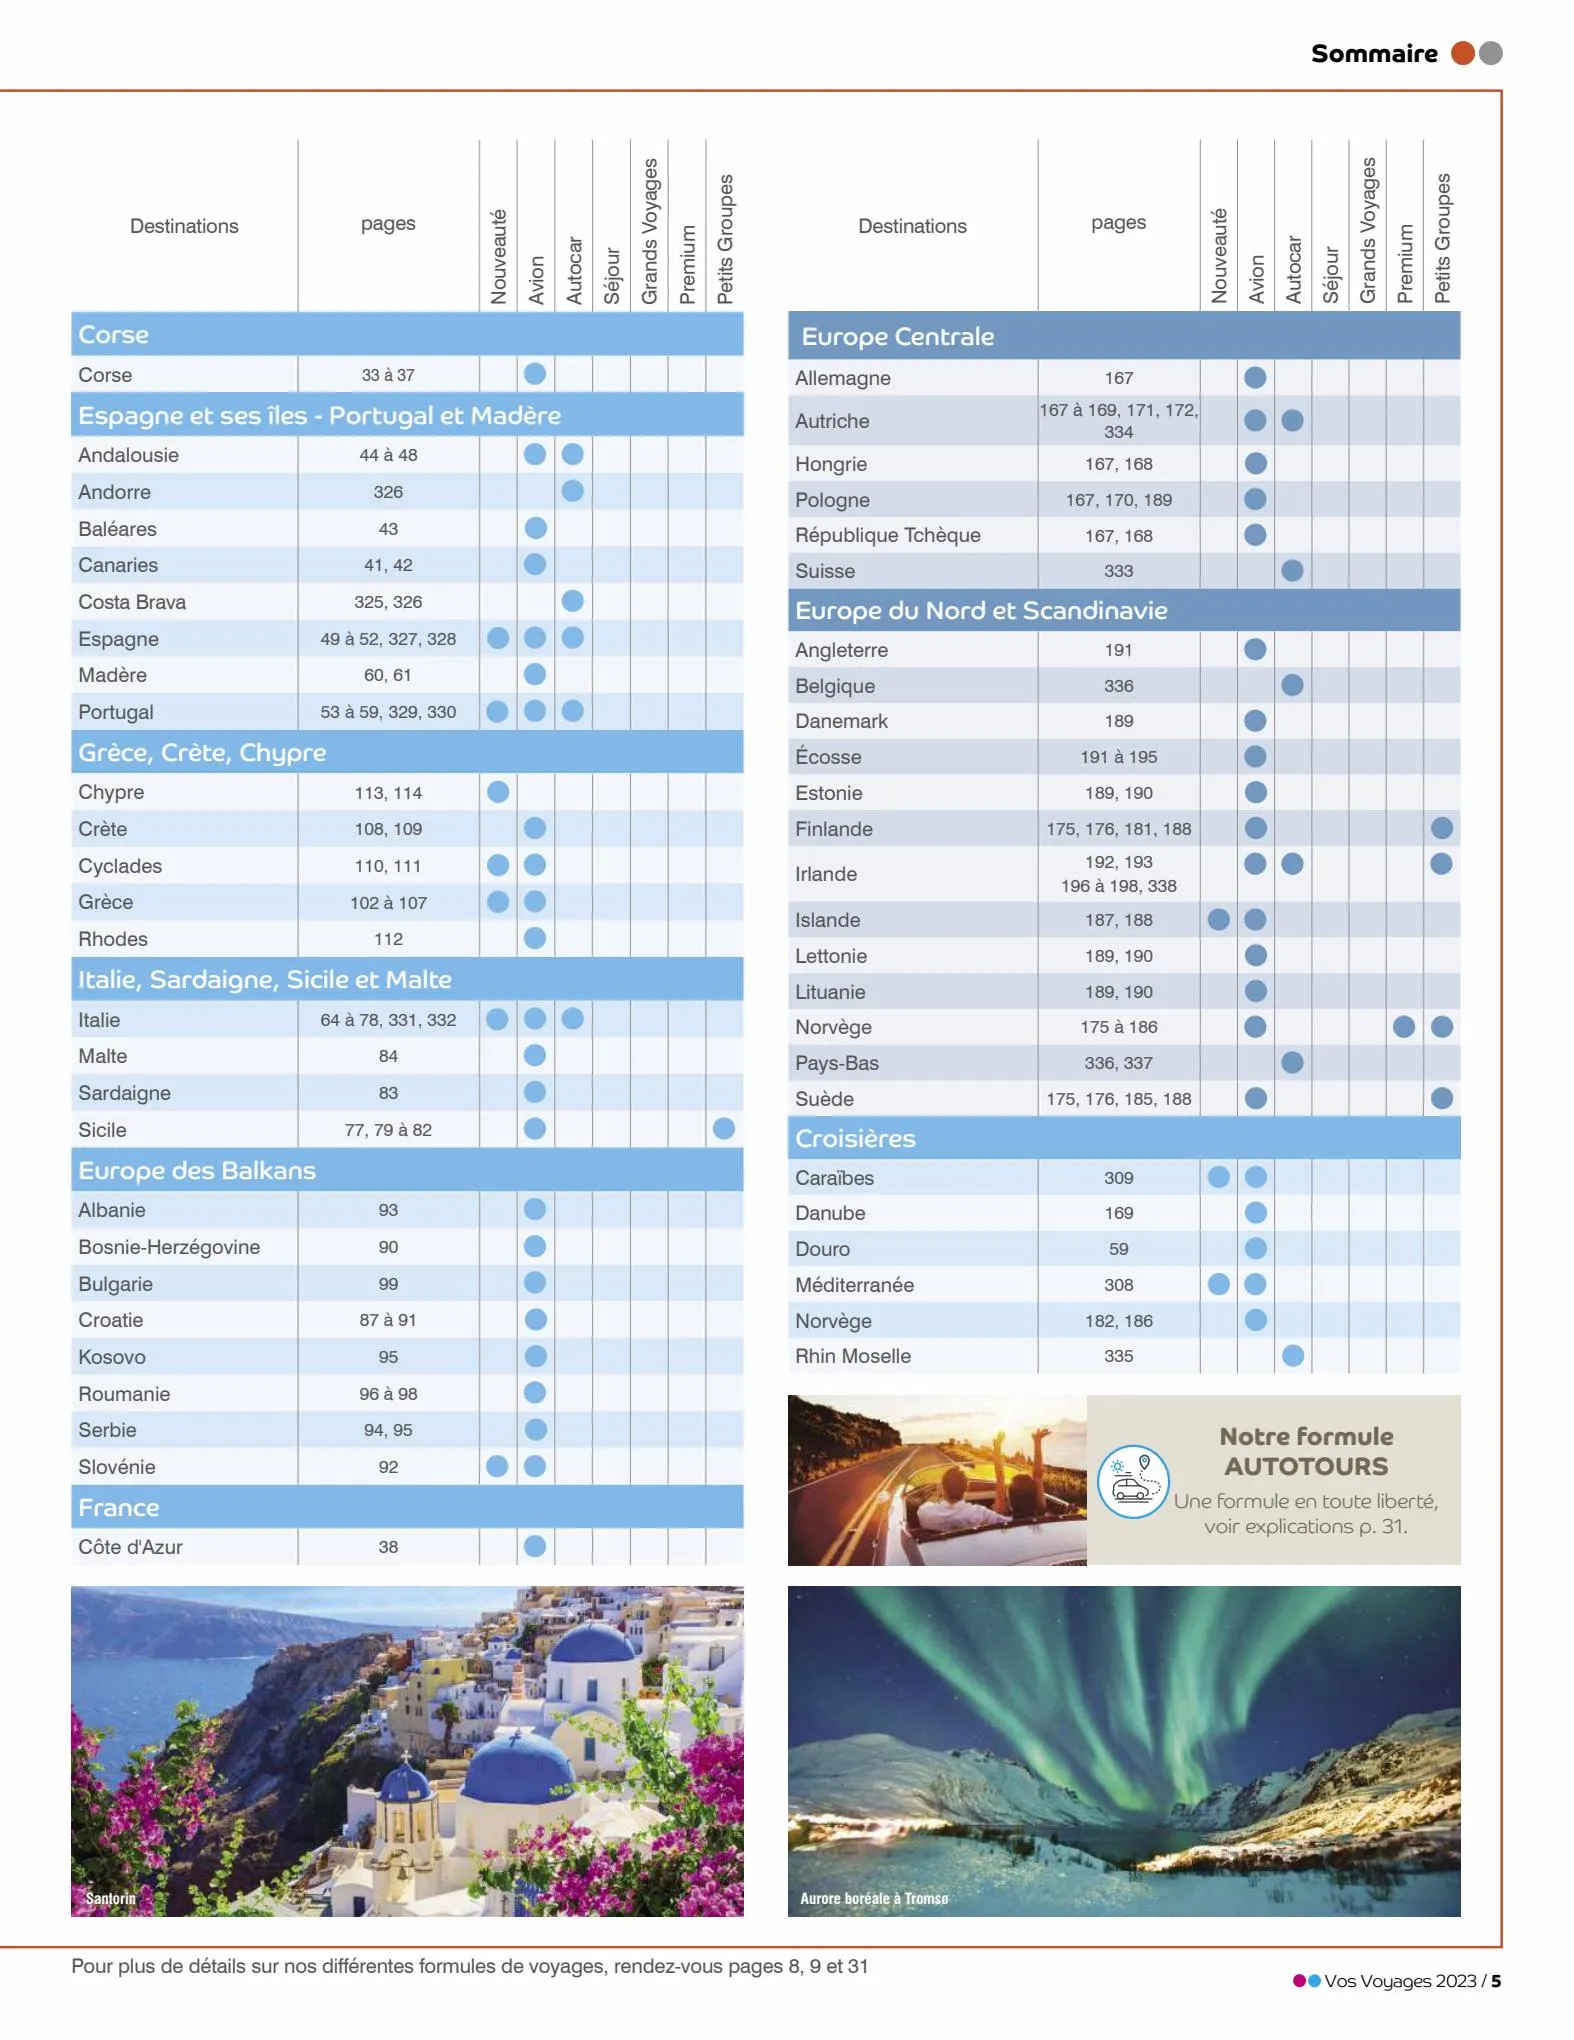 Catalogue Vos Voyages 2022-2023, page 00005